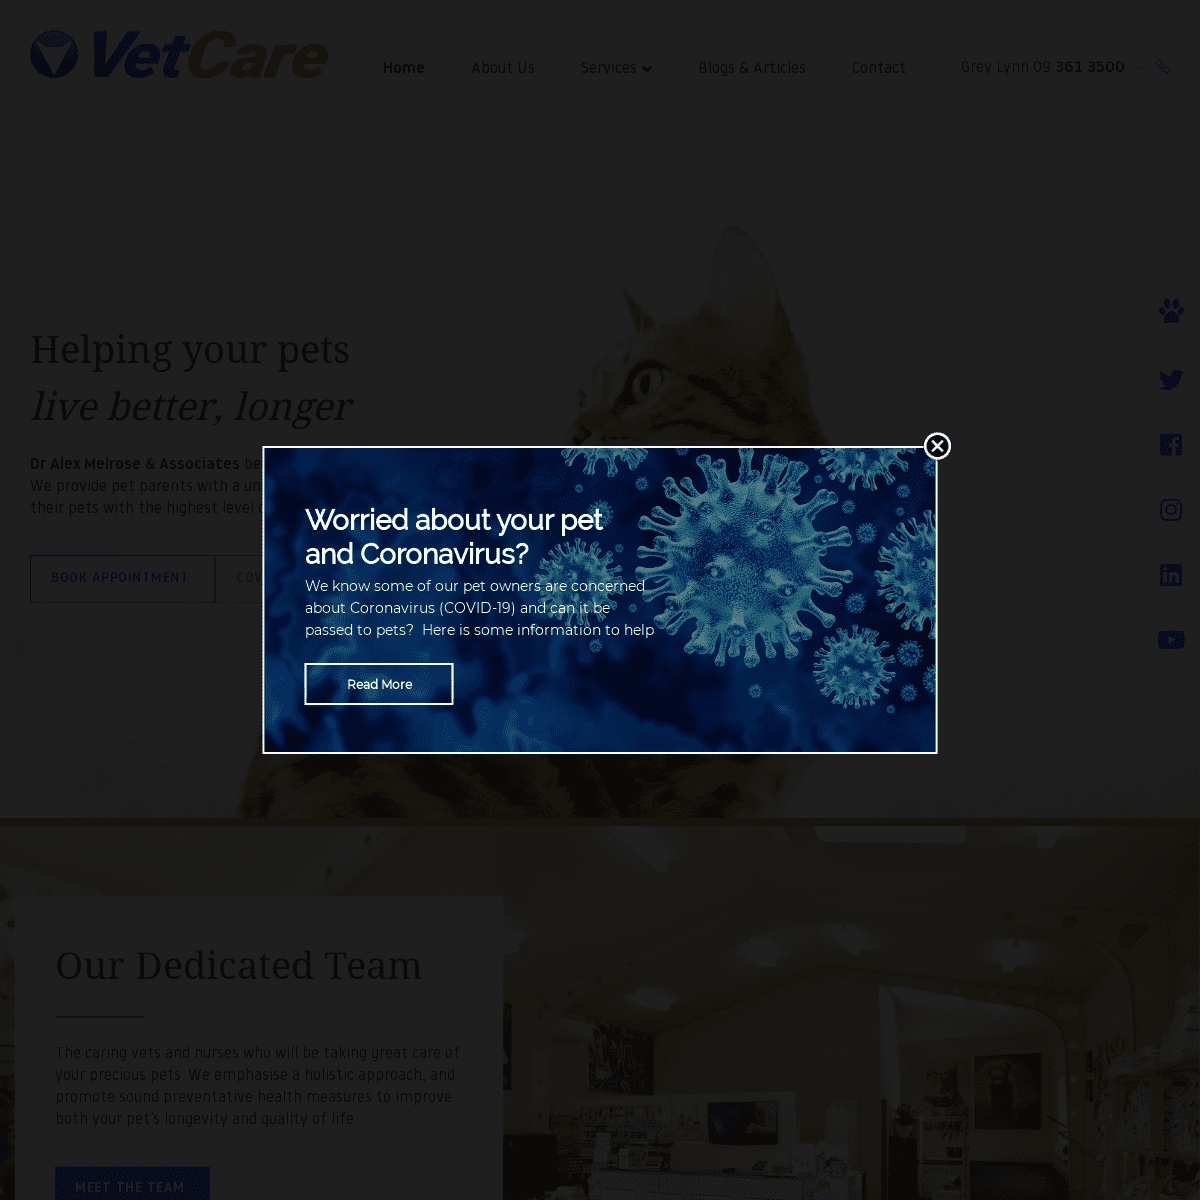 A complete backup of vetcare.net.nz